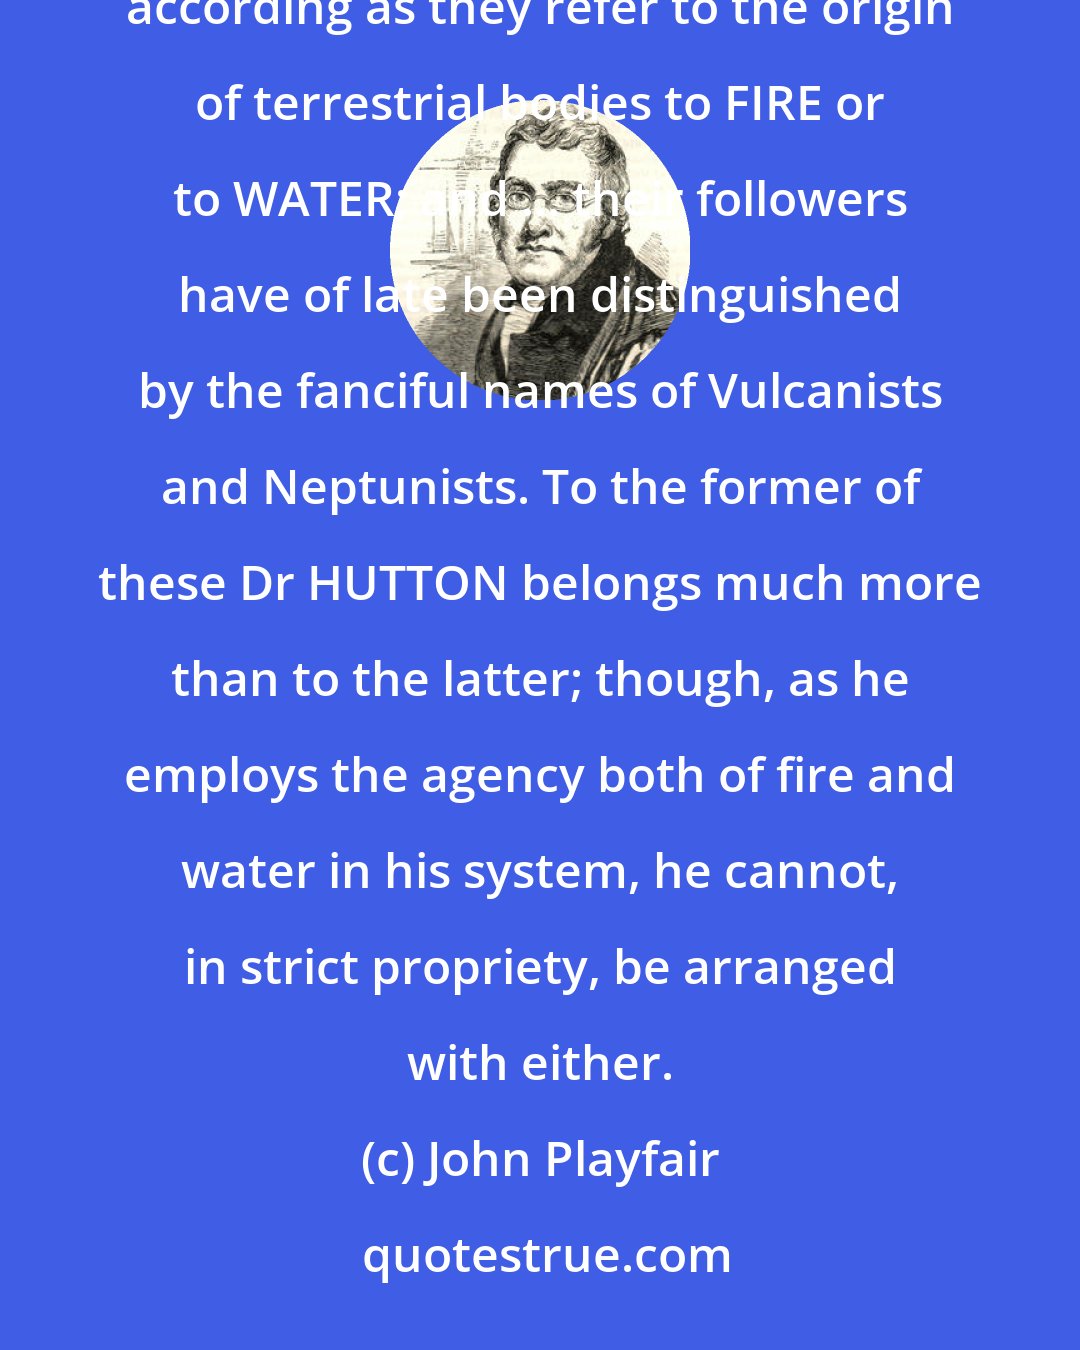 John Playfair: [To] explain the phenomena of the mineral kingdom ... systems are usually reduced to two classes, according as they refer to the origin of terrestrial bodies to FIRE or to WATER; and ... their followers have of late been distinguished by the fanciful names of Vulcanists and Neptunists. To the former of these Dr HUTTON belongs much more than to the latter; though, as he employs the agency both of fire and water in his system, he cannot, in strict propriety, be arranged with either.